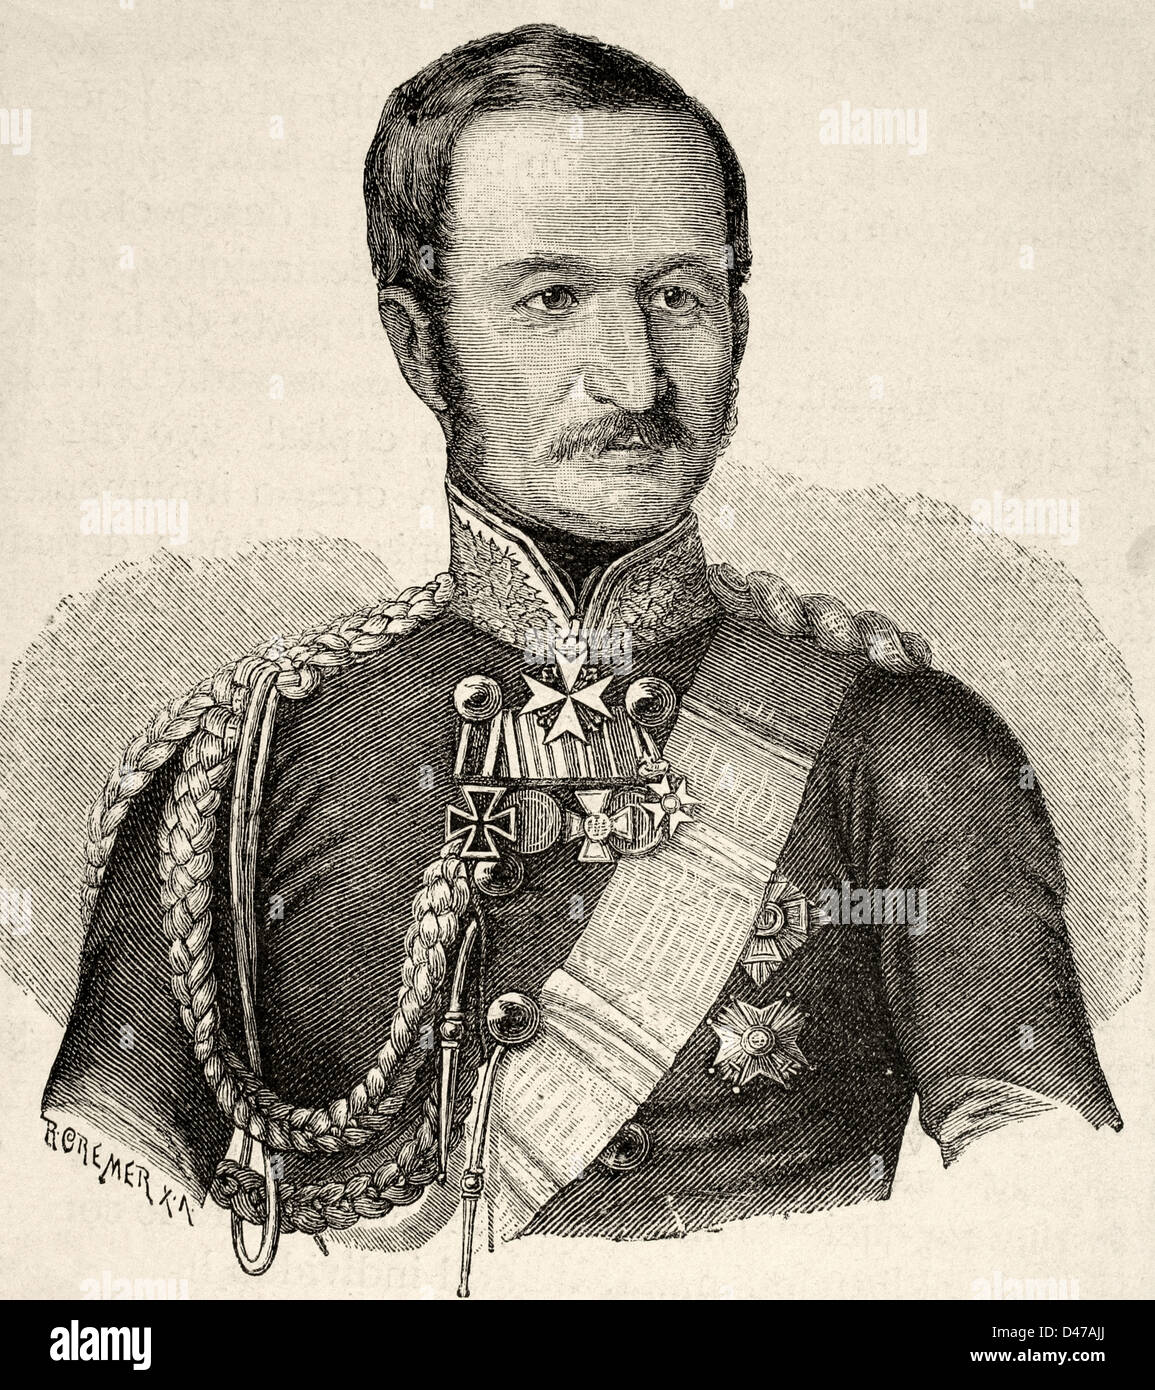 Adolf von Bonin (1803-1872). Prussian general. Engraving in The Universal History, 1885. Stock Photo